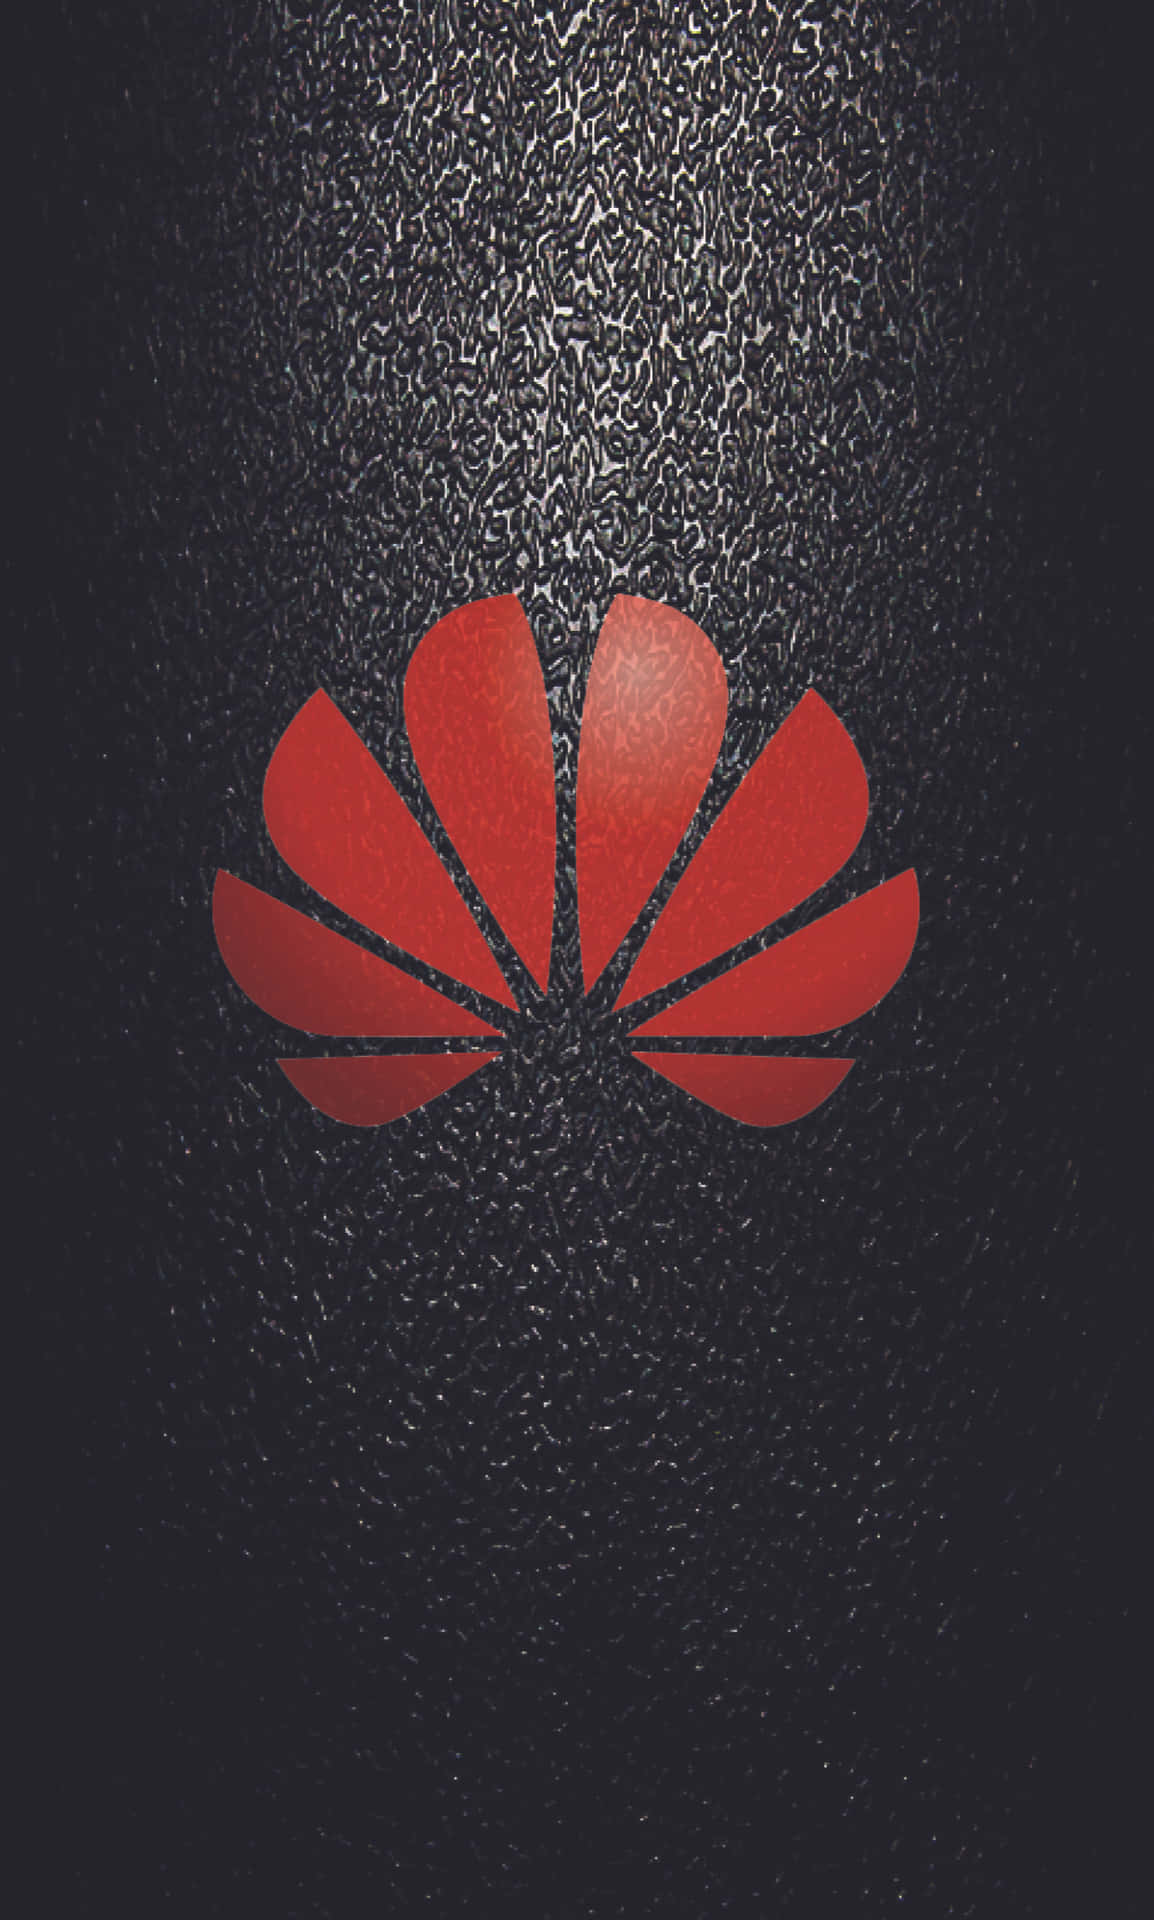 "Stay ahead with Huawei"